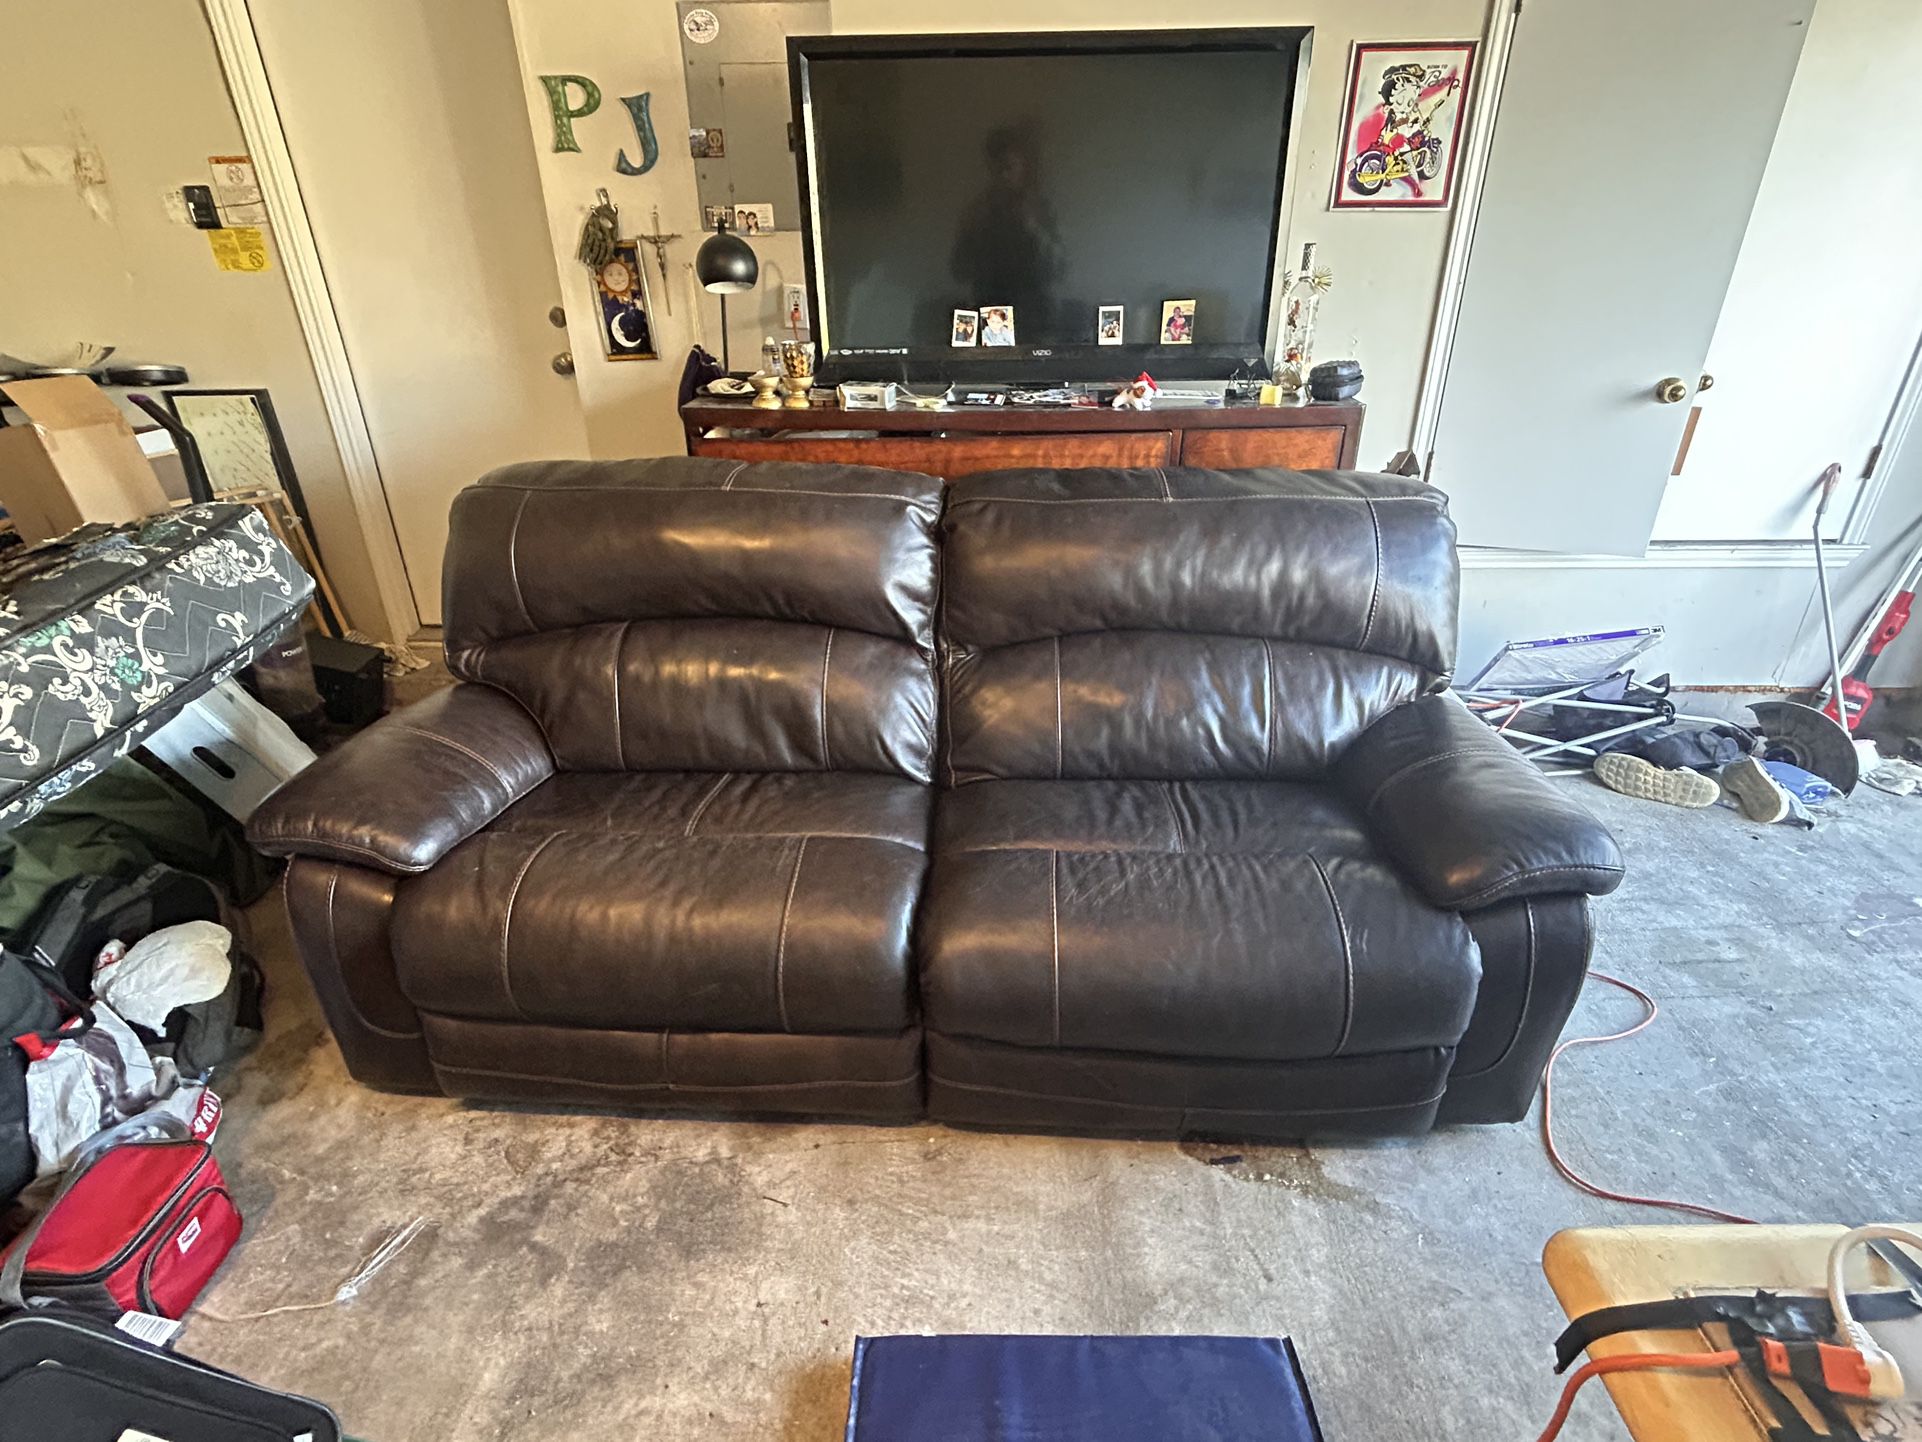 2 Power Reclining Sofa Great Condition 